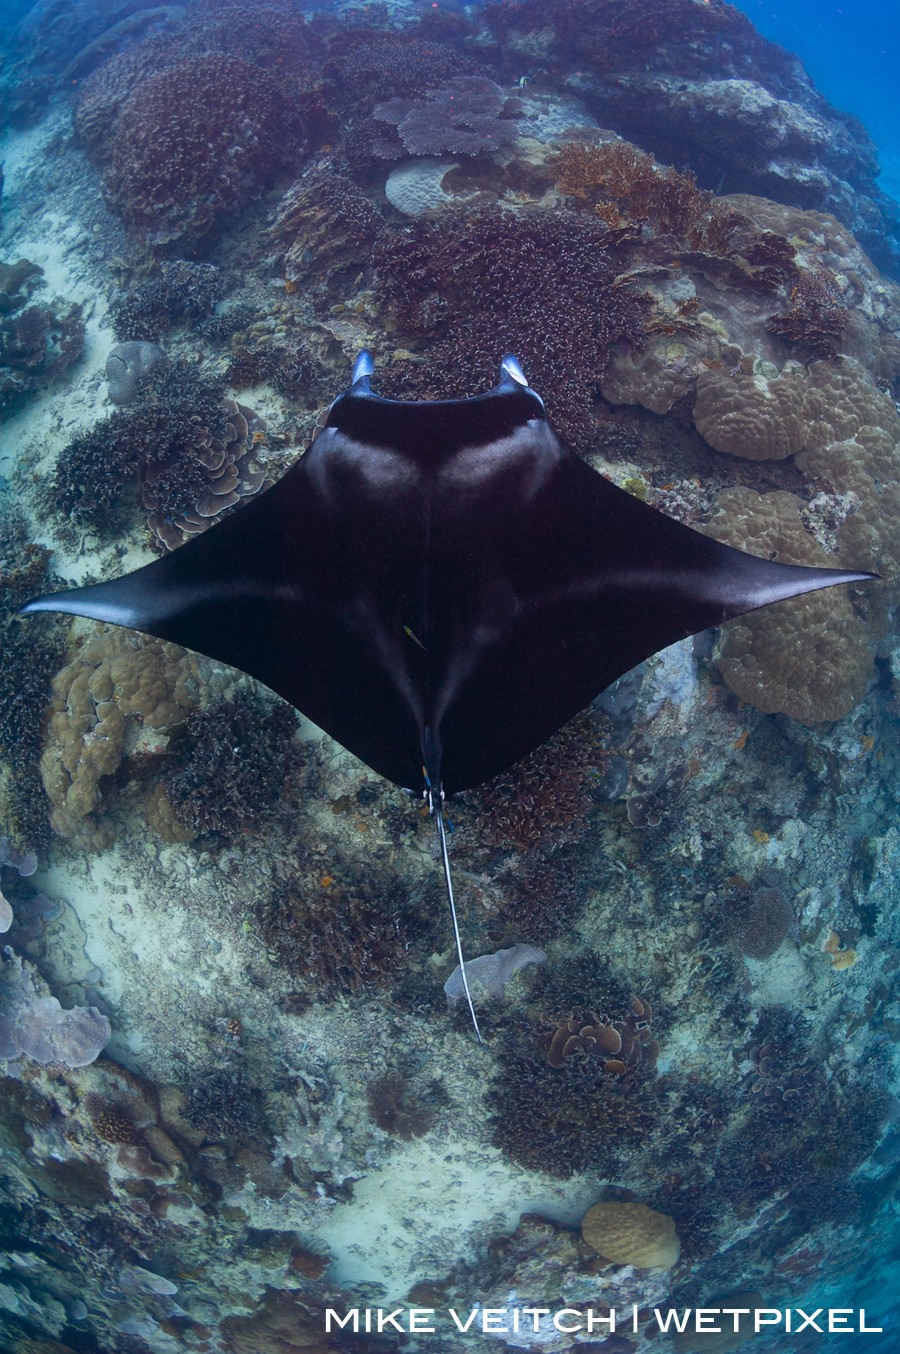 A reef manta ray, *Manta alfredi*, hovers above a cleaning station.  A keen eye can spot the cleaner fish around the tail.  Goofnuw Channel, Yap, Micronesia